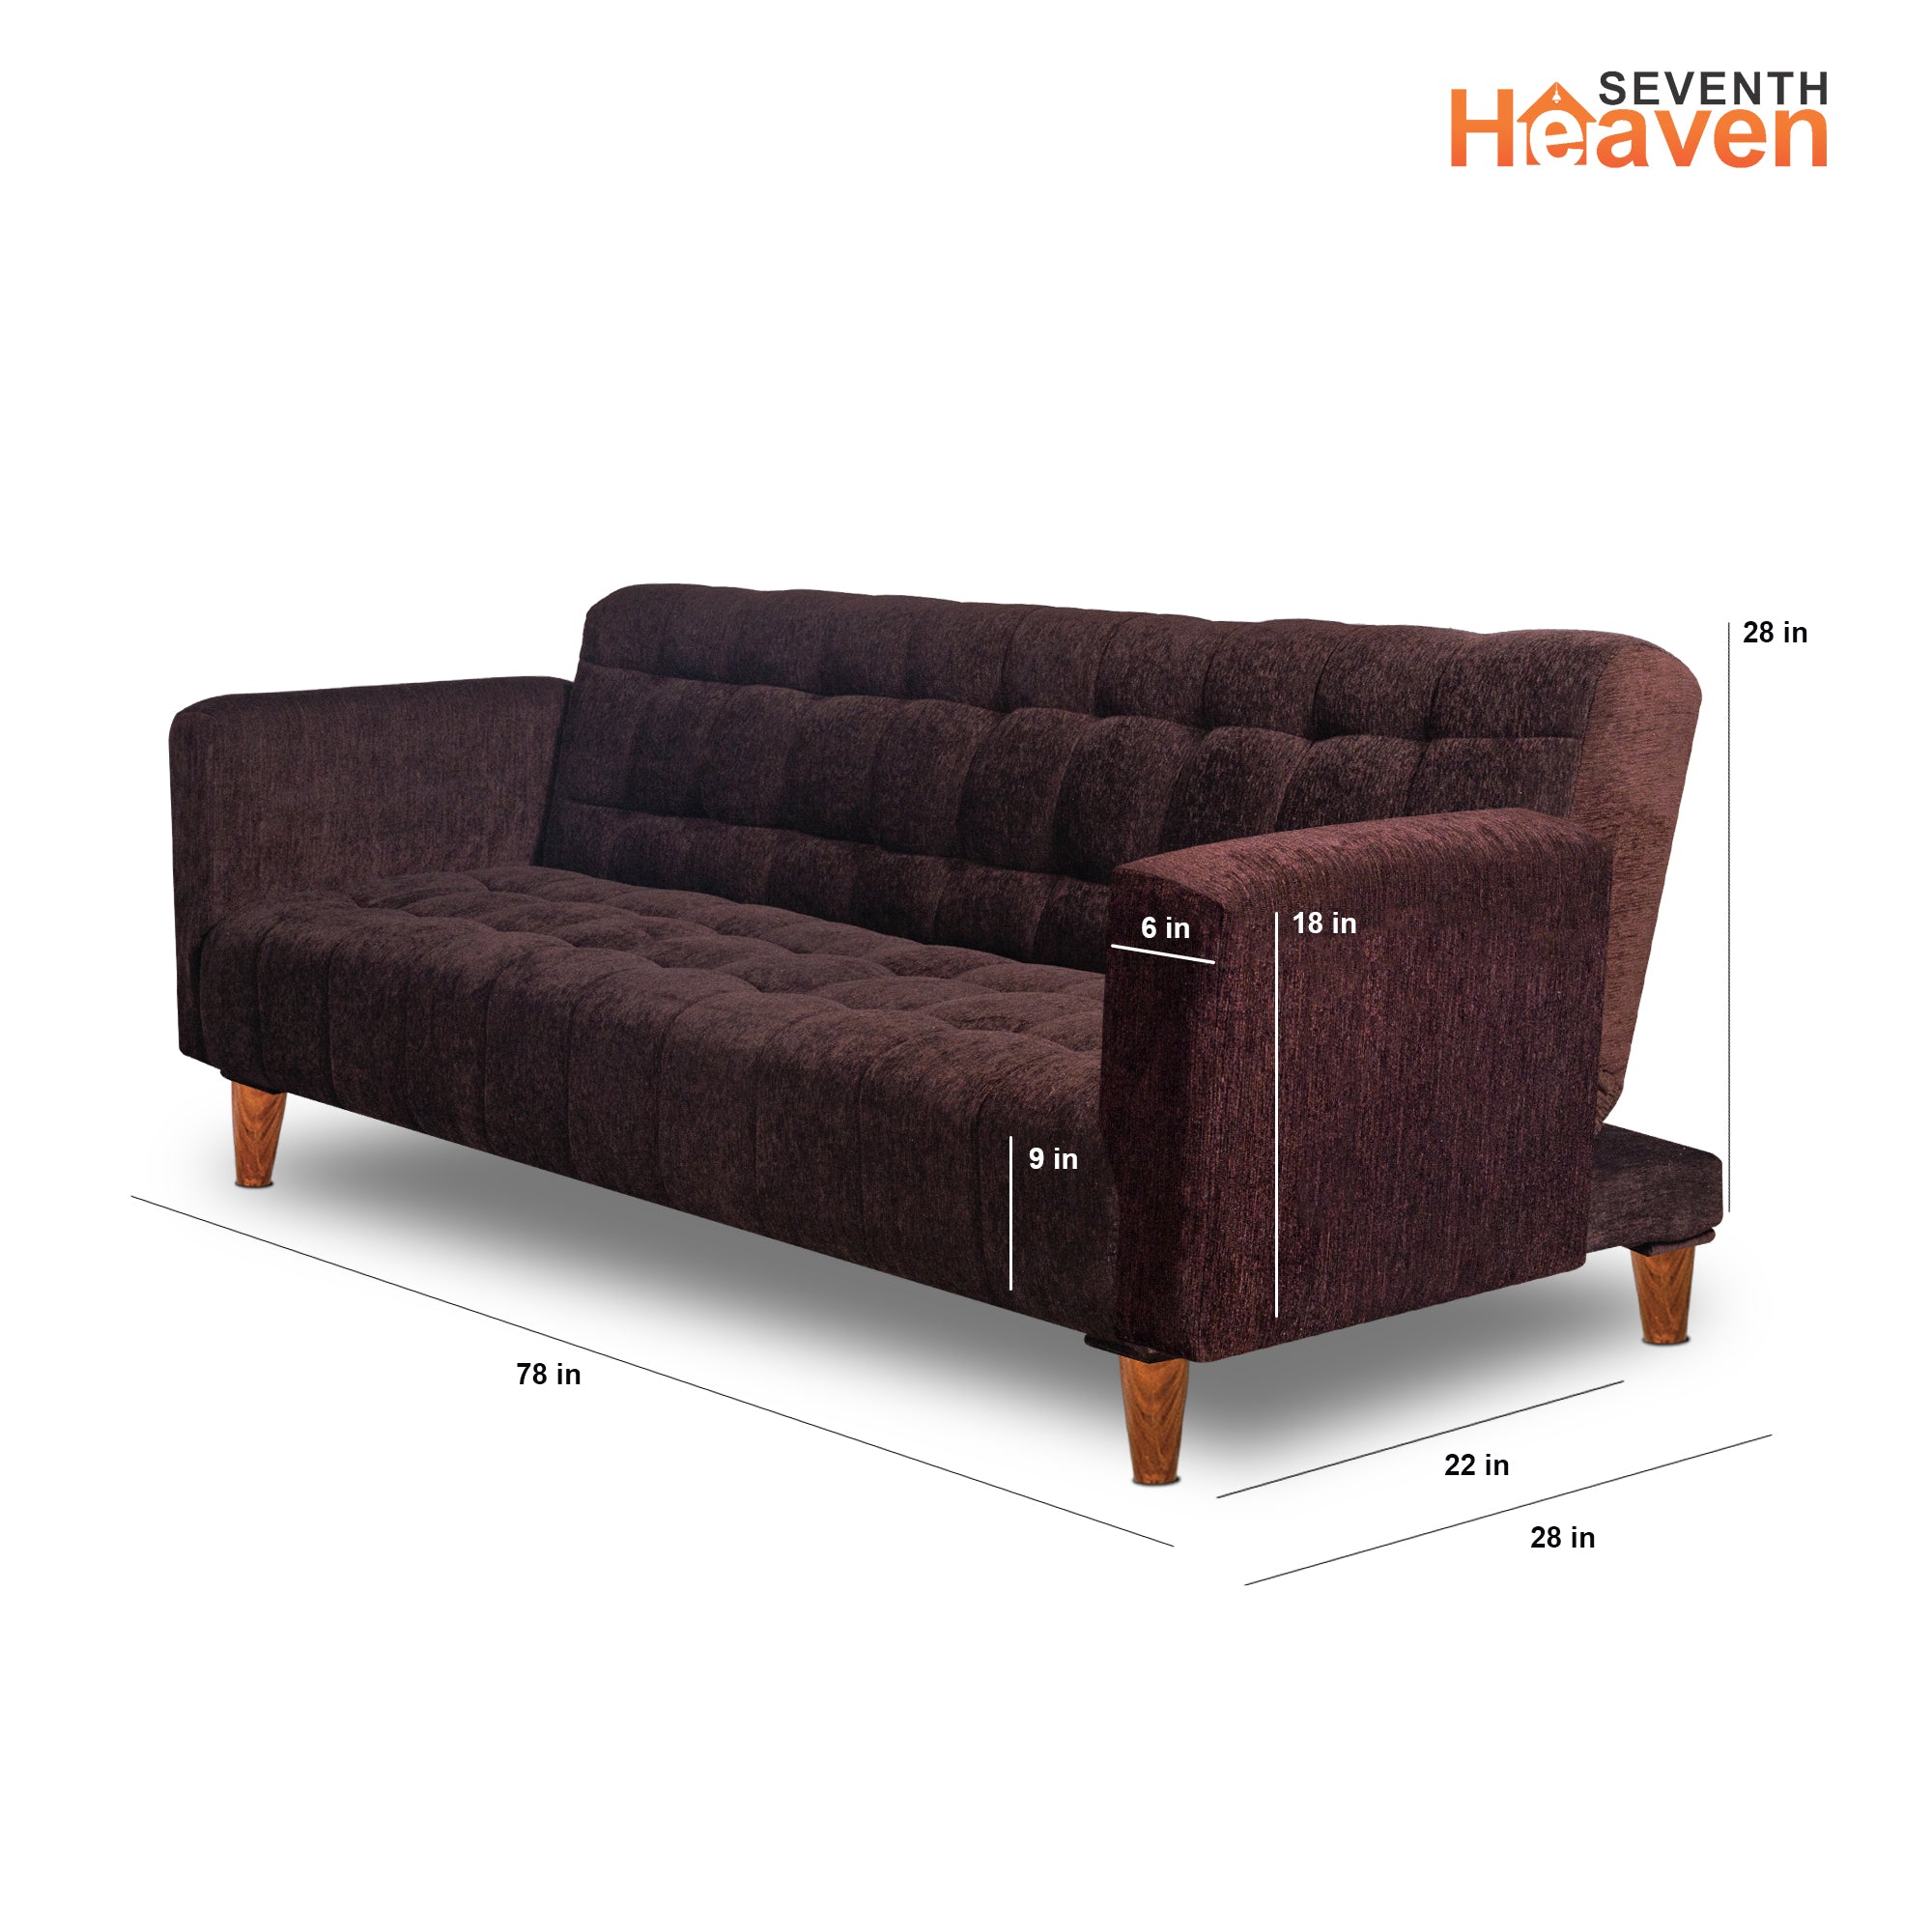 Seventh Heaven 4 Seater Wooden Sofa cum Bed, Chenille Molfino Fabric 72x36x16: 3 Year Warranty 4 Seater Single Solid Wood Pull Out Sofa Cum Bed  (Finish Color - Brown Delivery Condition - DIY(Do-It-Yourself))